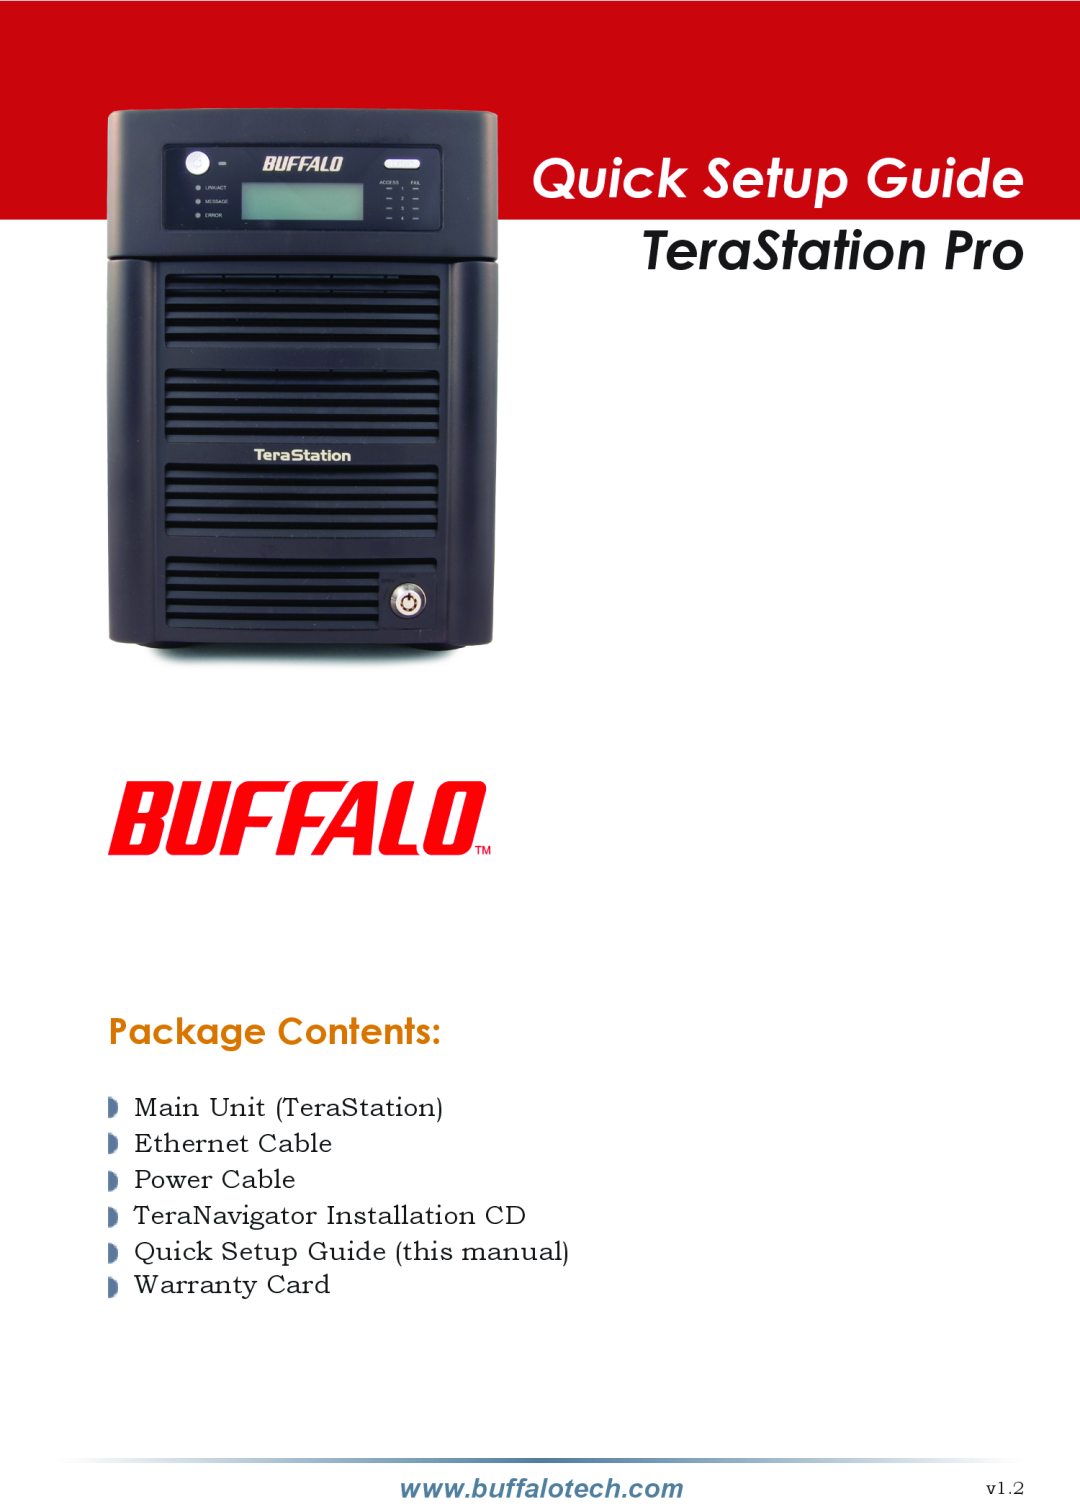 Buffalo Technology none setup guide Package Contents, Quick Setup Guide, TeraStation Pro 